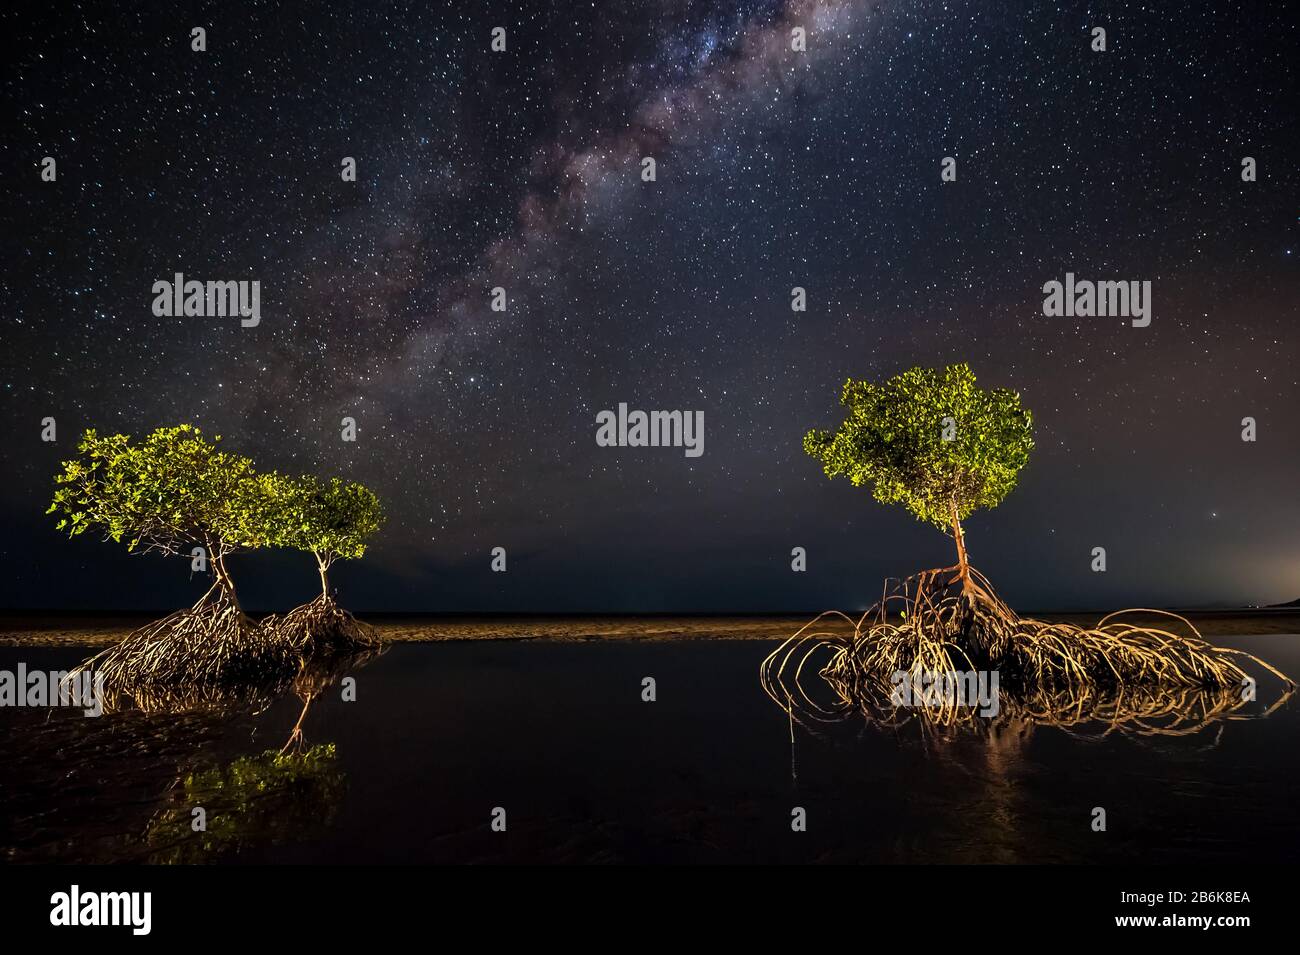 Milky way photography and three red mangrove trees on the mudflats at Yule point Far North Queensland, Australia. Stock Photo